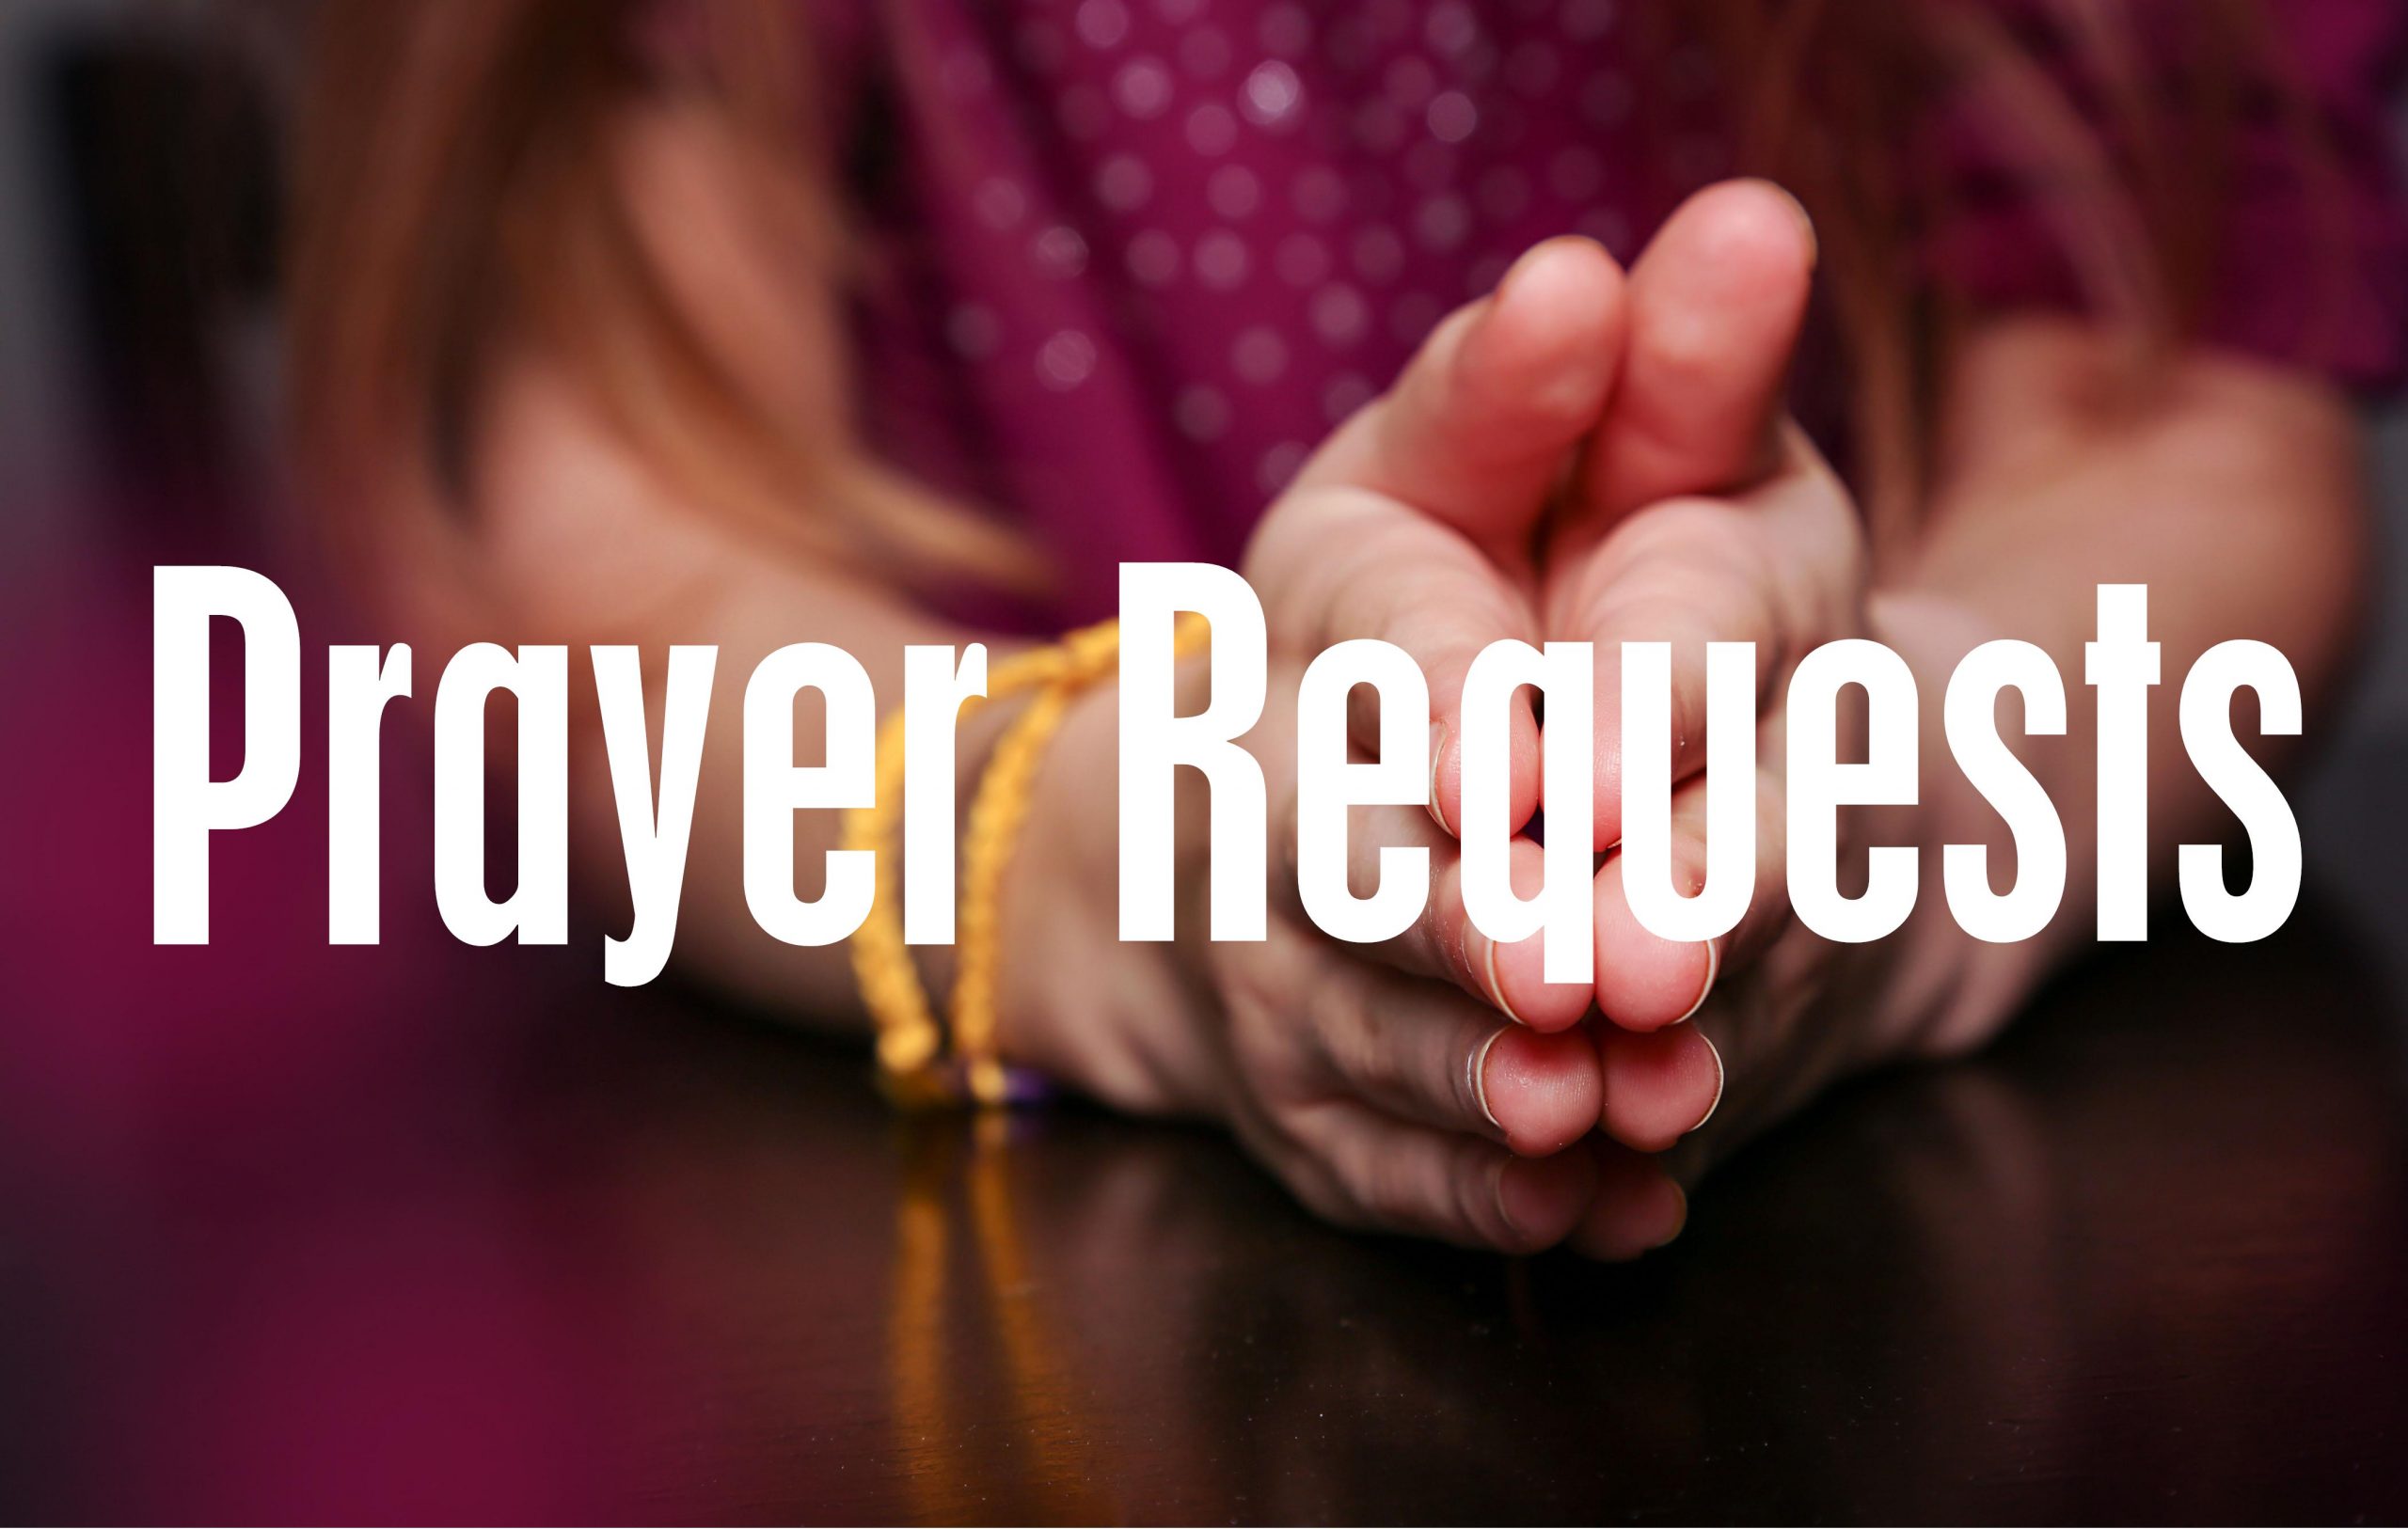 prayer requests images